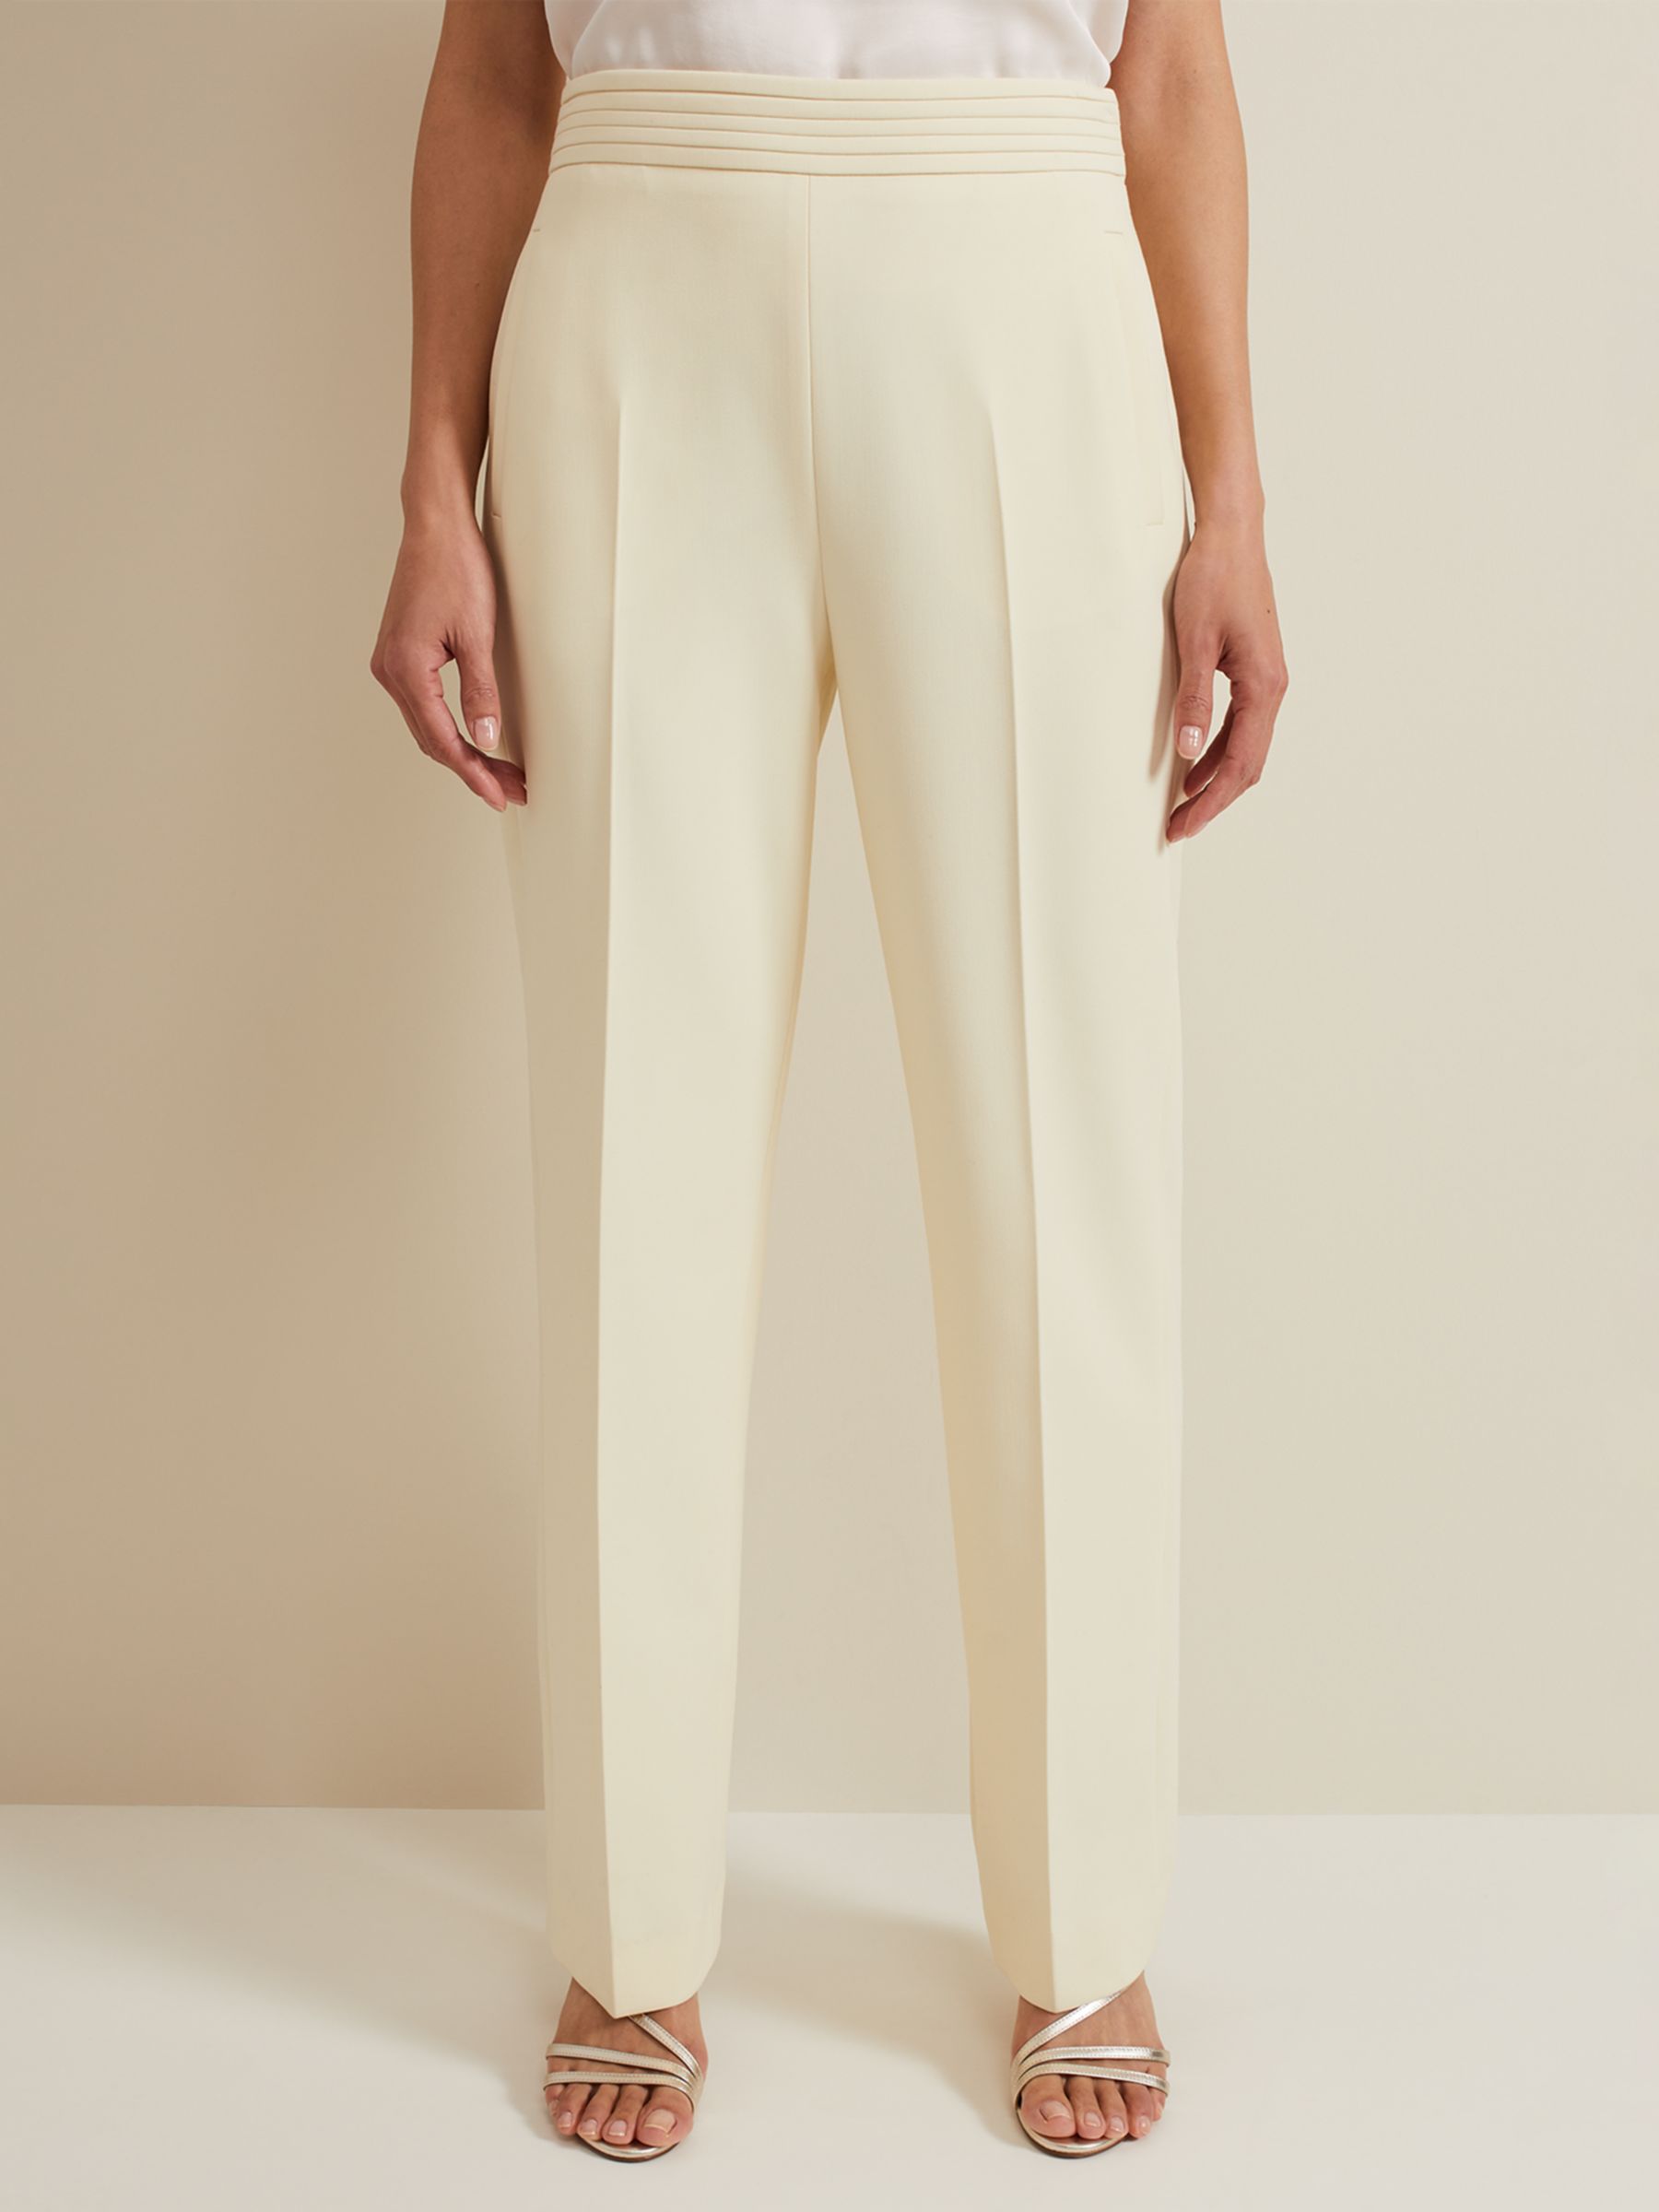 Phase Eight Alexis Pleat Waistband Trousers, Yellow, 6